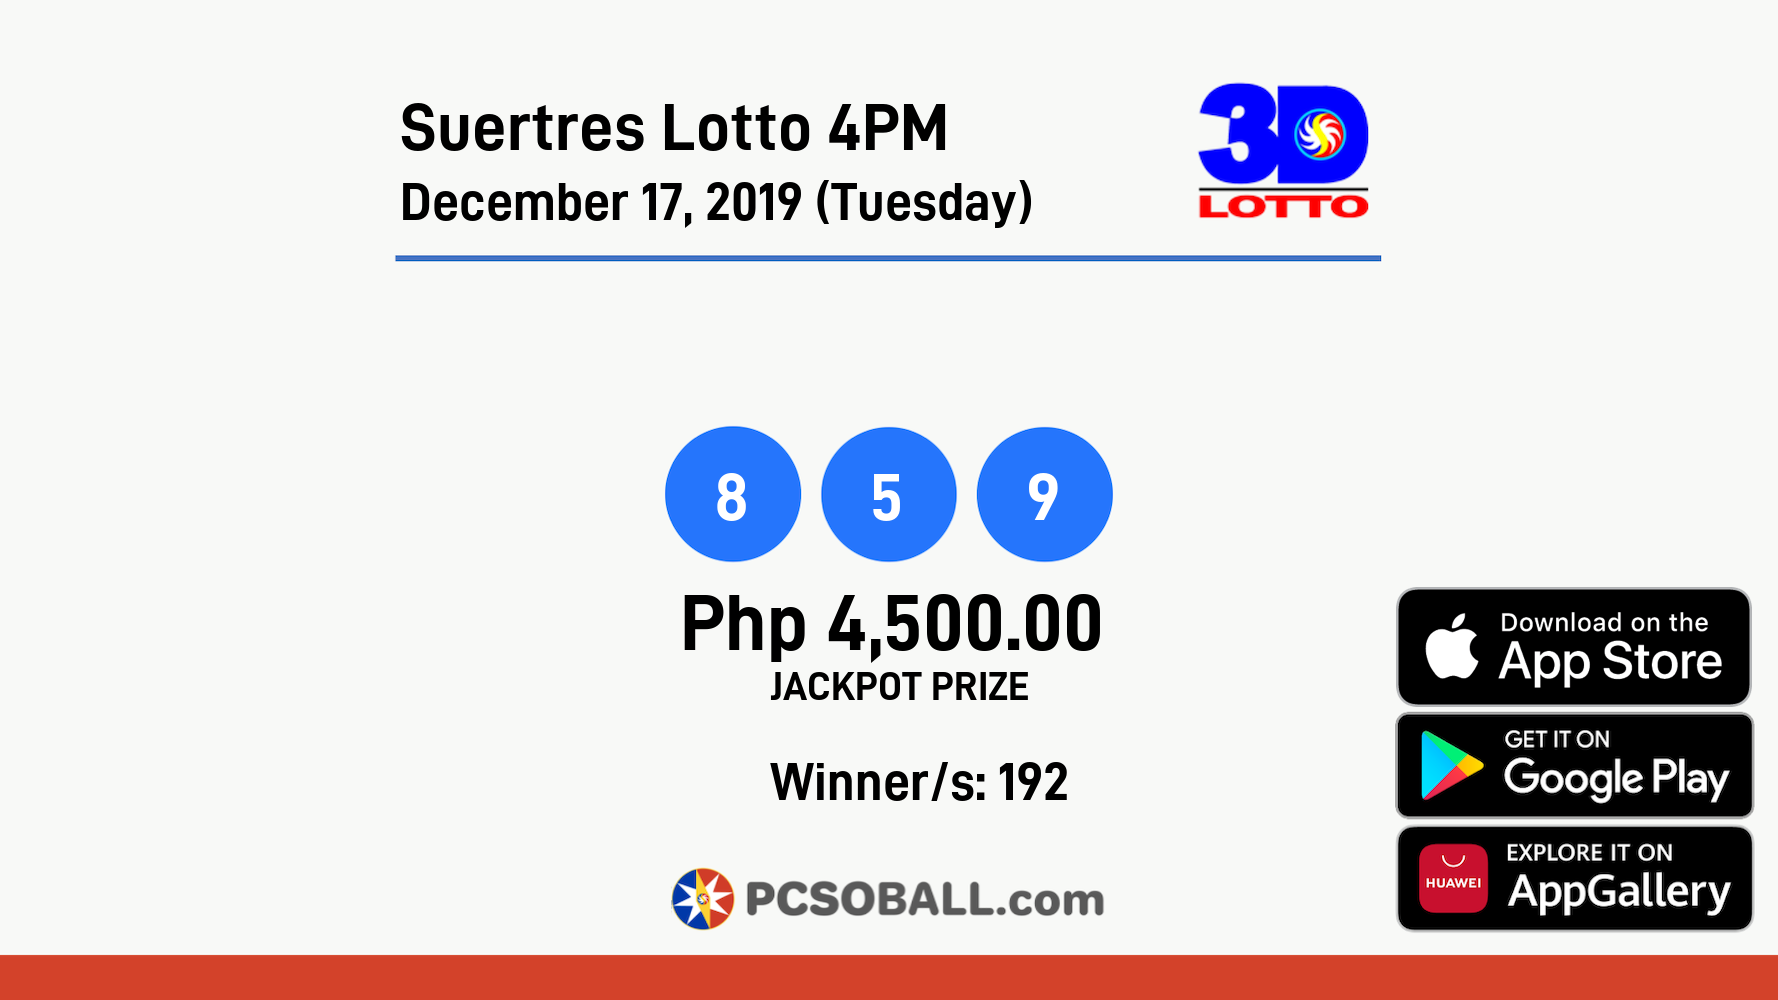 Suertres Lotto 4PM December 17, 2019 (Tuesday) Result